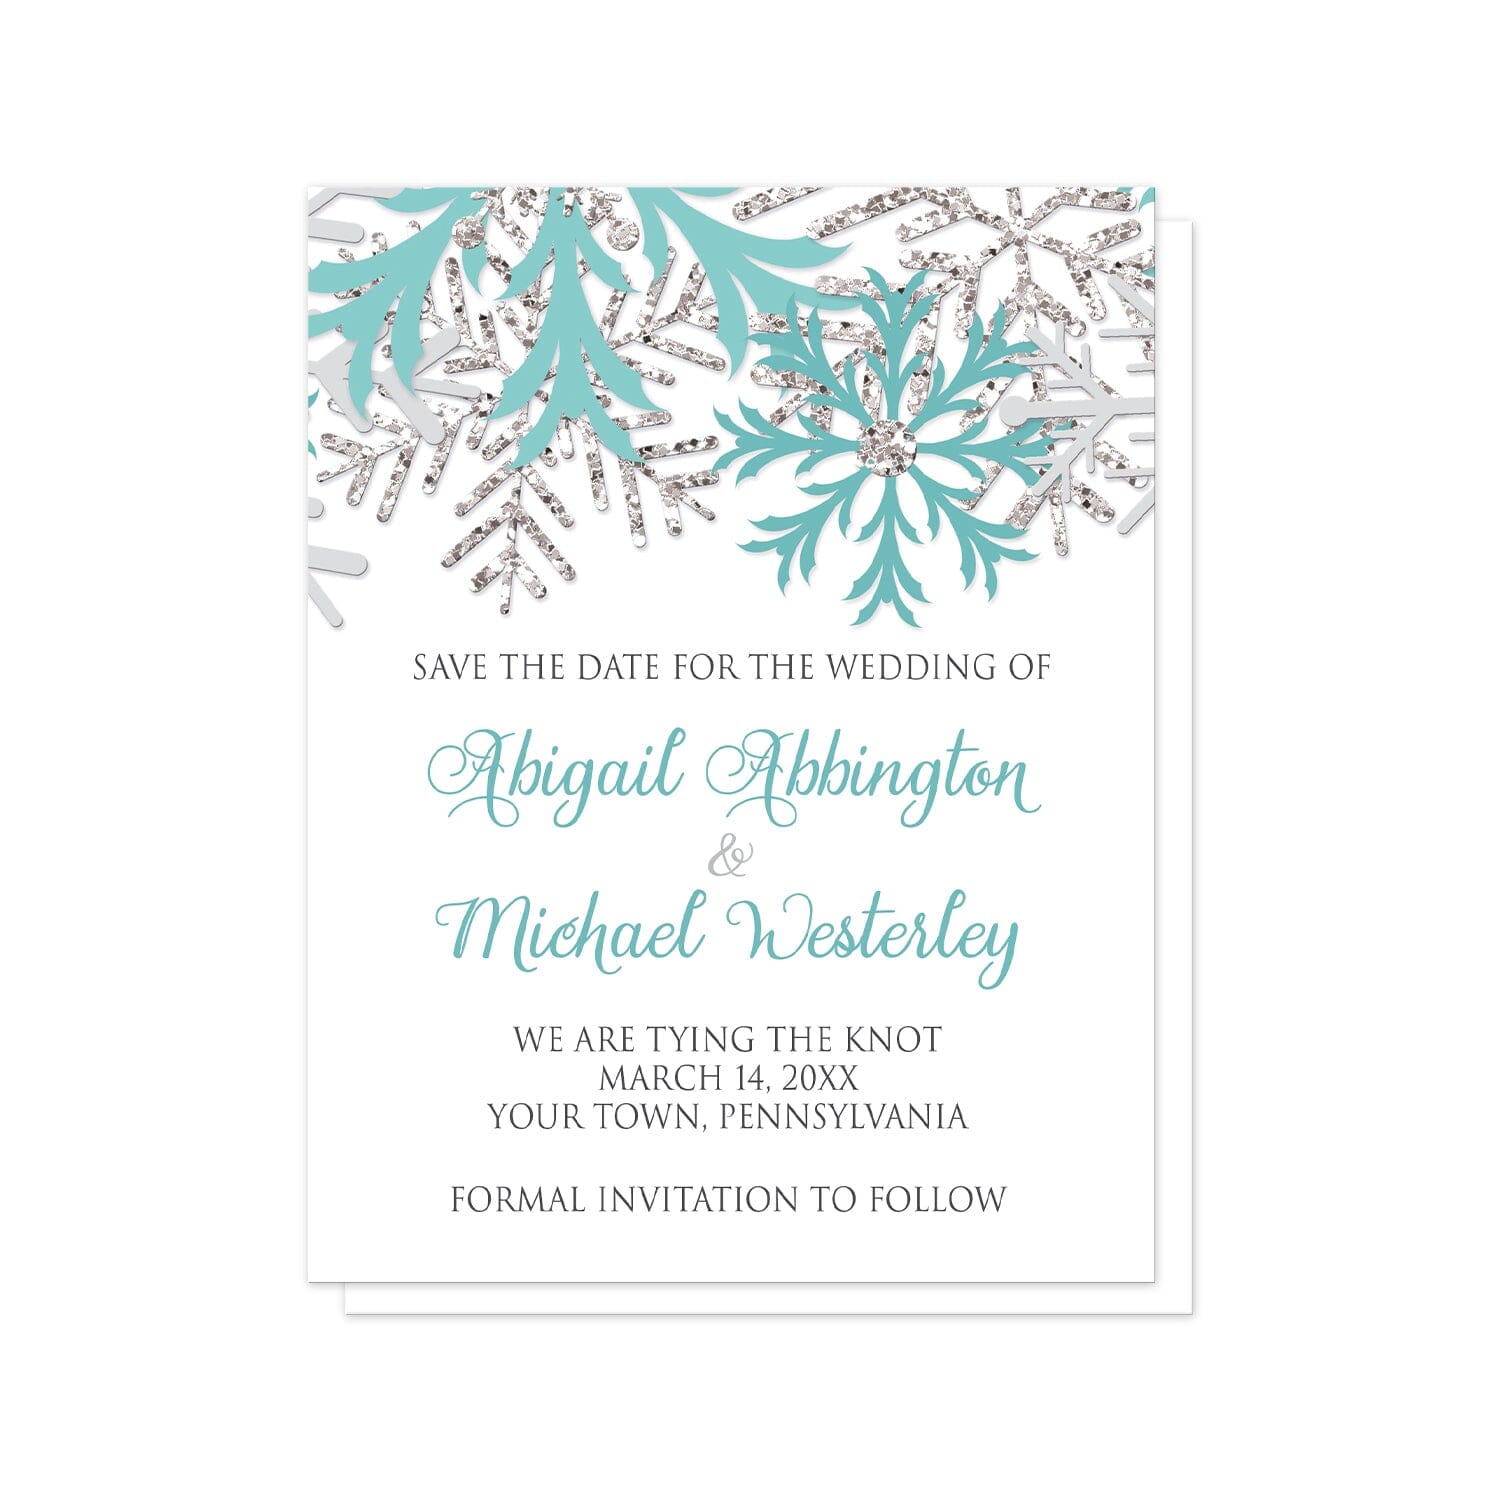 Winter Teal Silver Snowflake Save the Date Cards at Artistically Invited. Beautiful winter teal silver snowflake save the date cards designed with teal, light teal, silver-colored glitter-illustrated, and light gray snowflakes along the top over a white background. Your personalized wedding date details are custom printed in teal and gray below the pretty snowflakes.